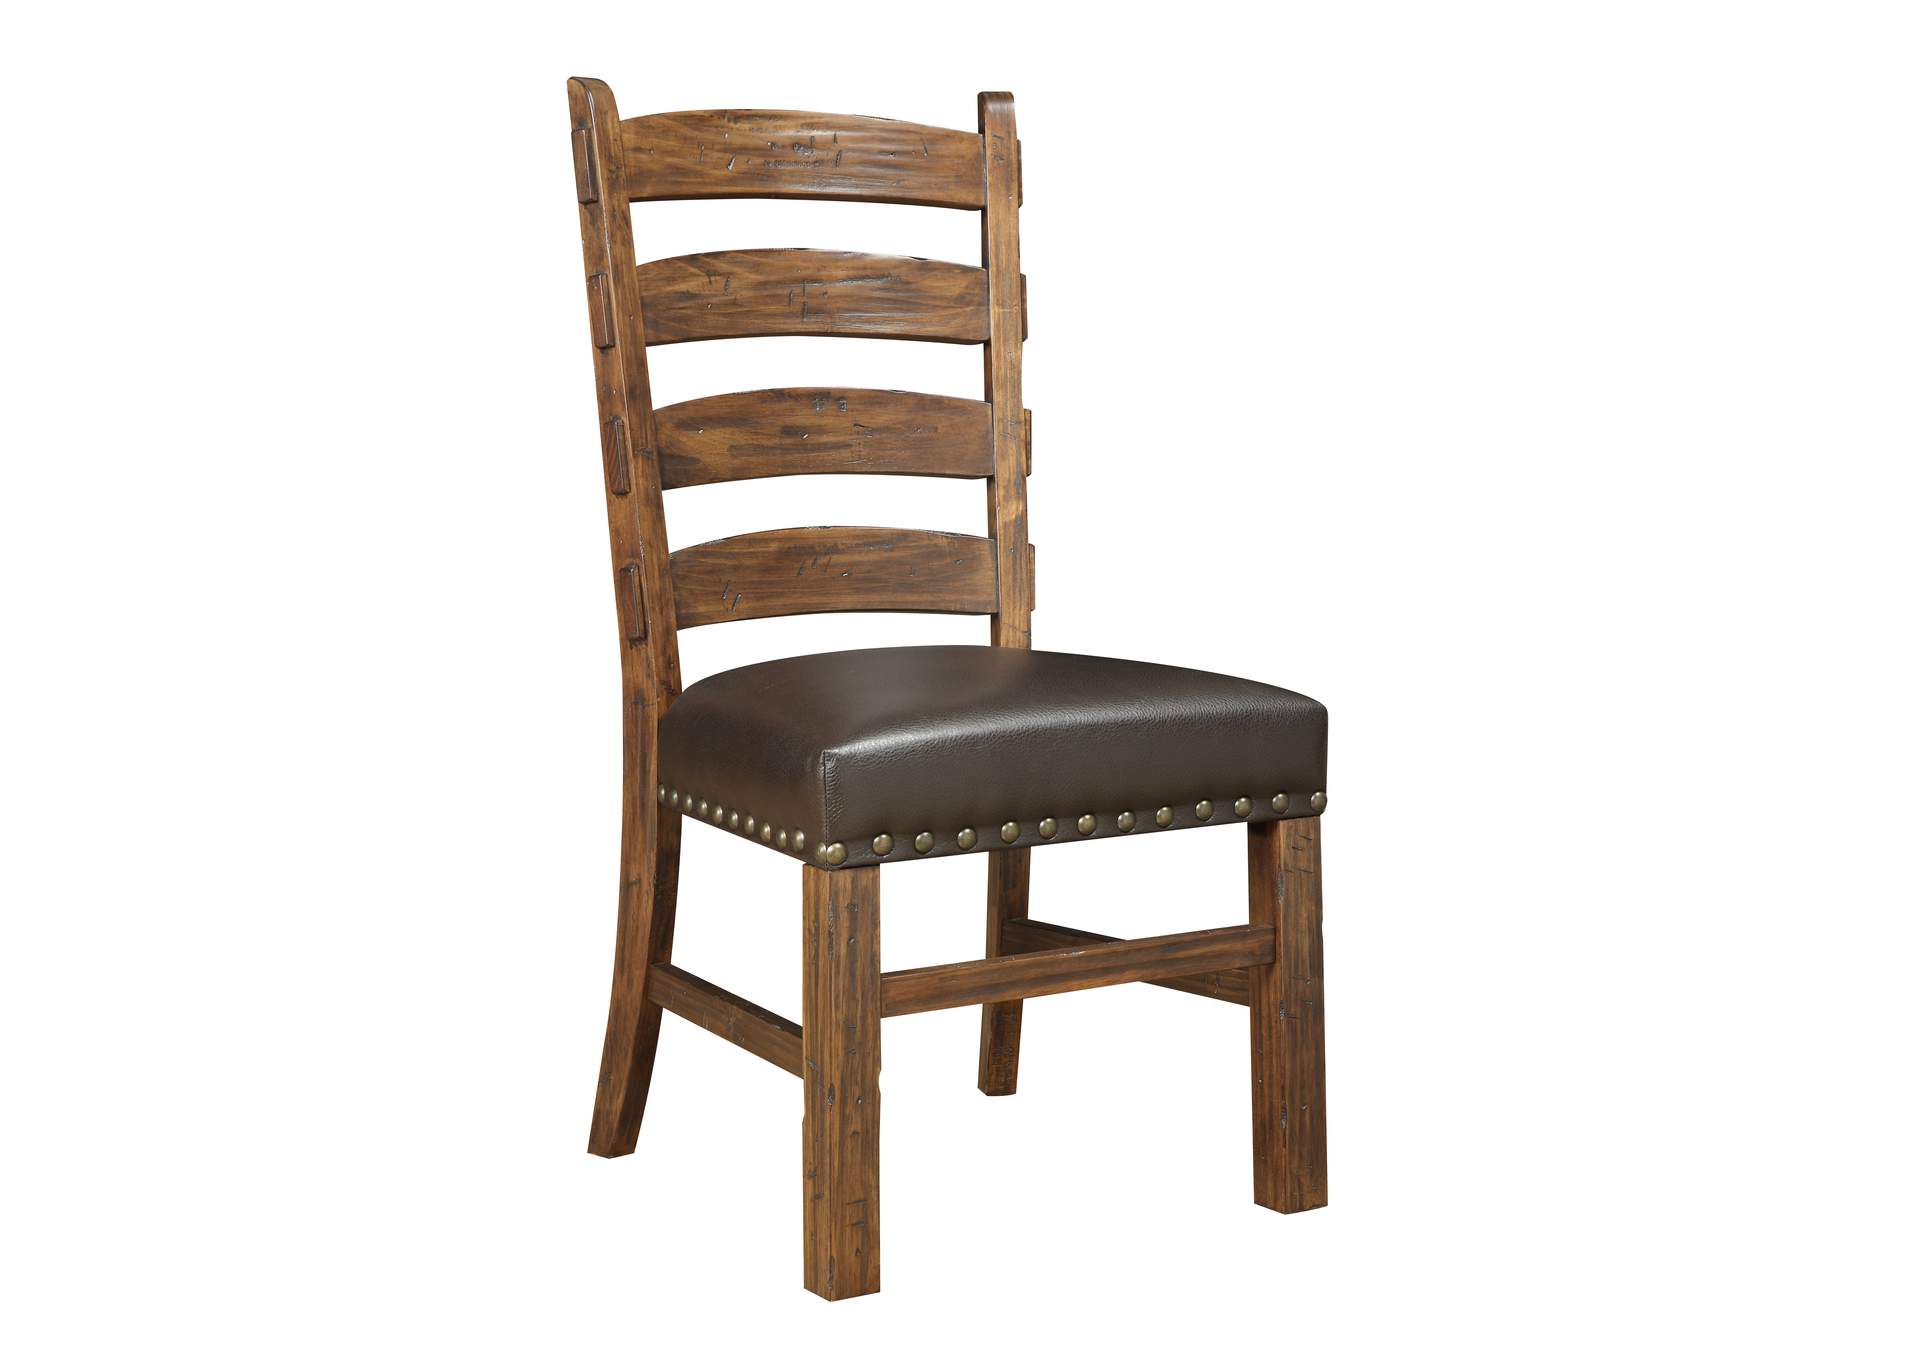 Chambers Creek Upholstered Dining Chair,Emerald Home Furnishings